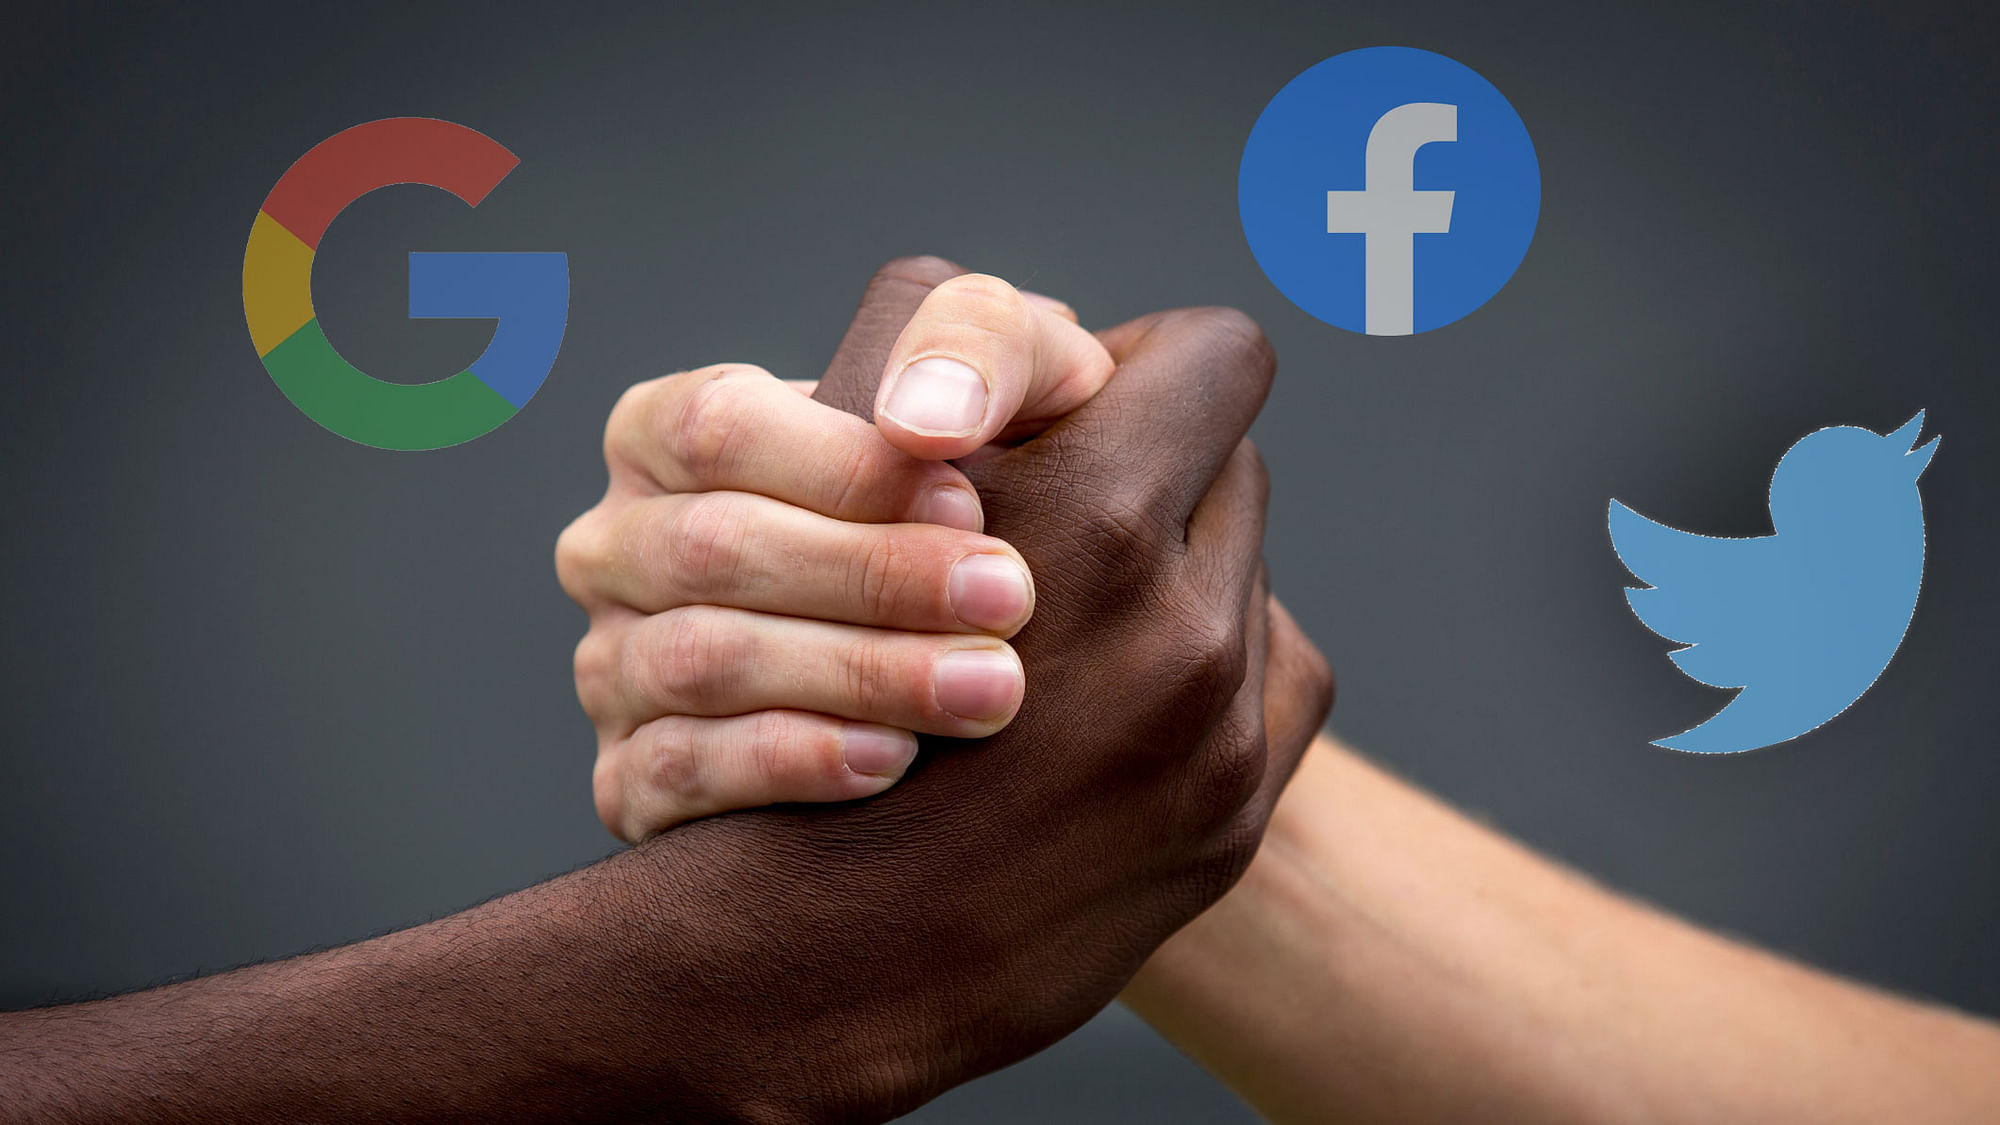 Global tech giants have released statements offering support for the Black community and pledging to fight against racism.